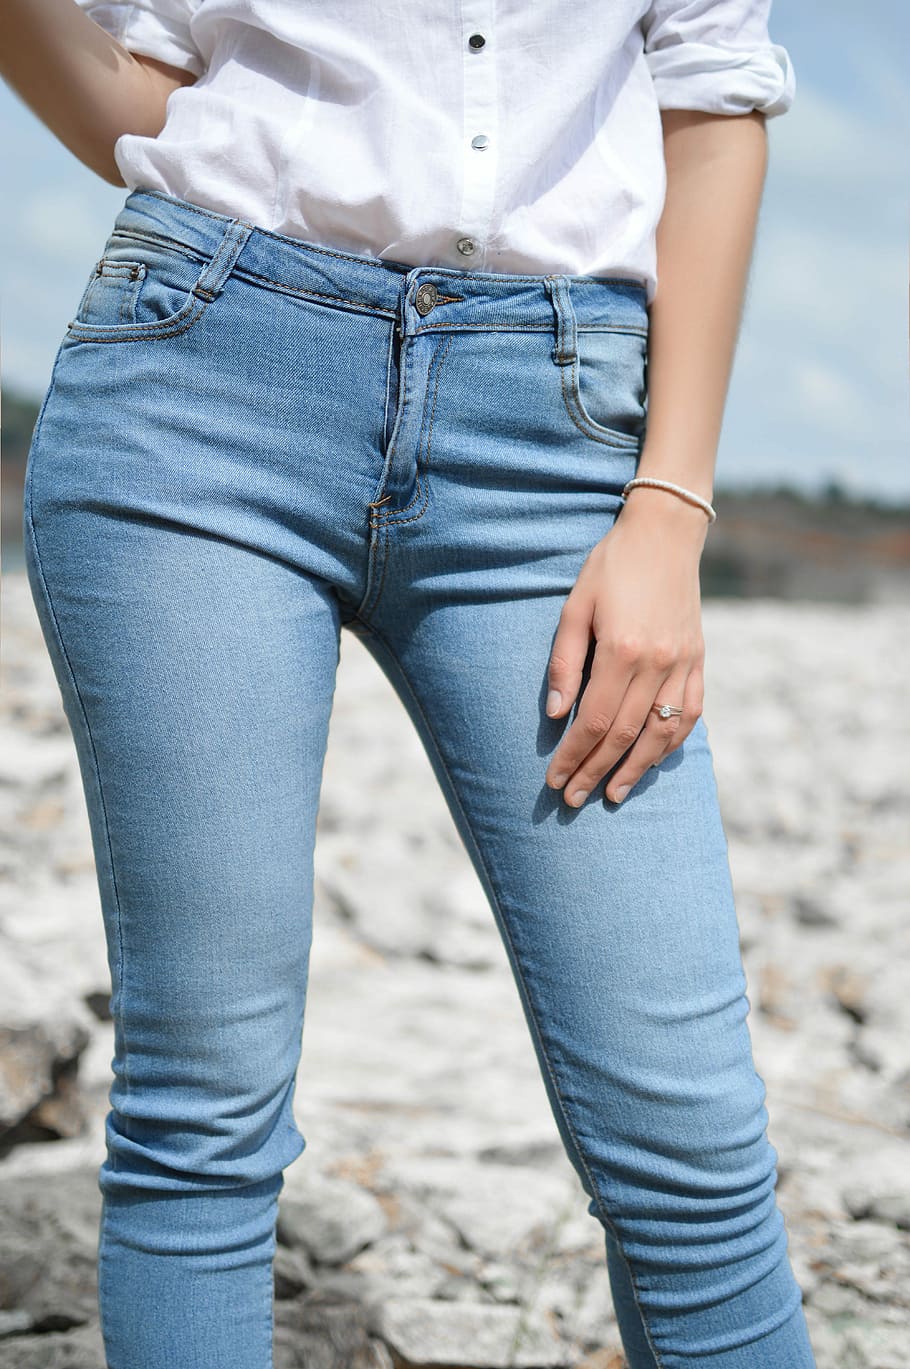 Photo of Women In Denim Shirt and Jeans Posing · Free Stock Photo-sonthuy.vn